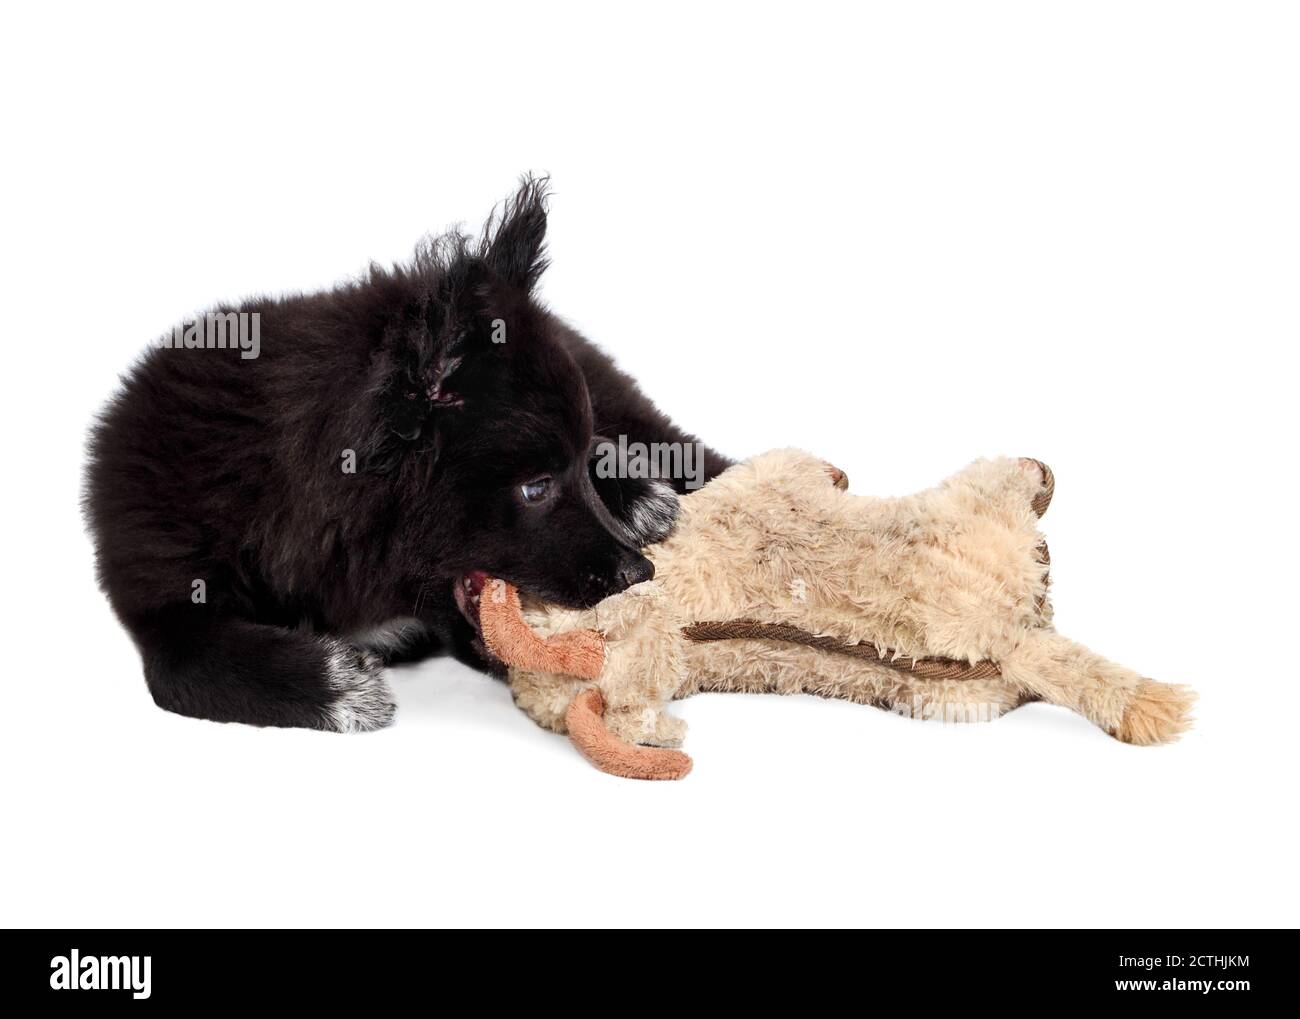 Fluffy black puppy chewing on dog toy, lying sideways. 12 week old male dog. Full body dog portrait of Australian Shepherd x Keeshond. Concept for pup Stock Photo